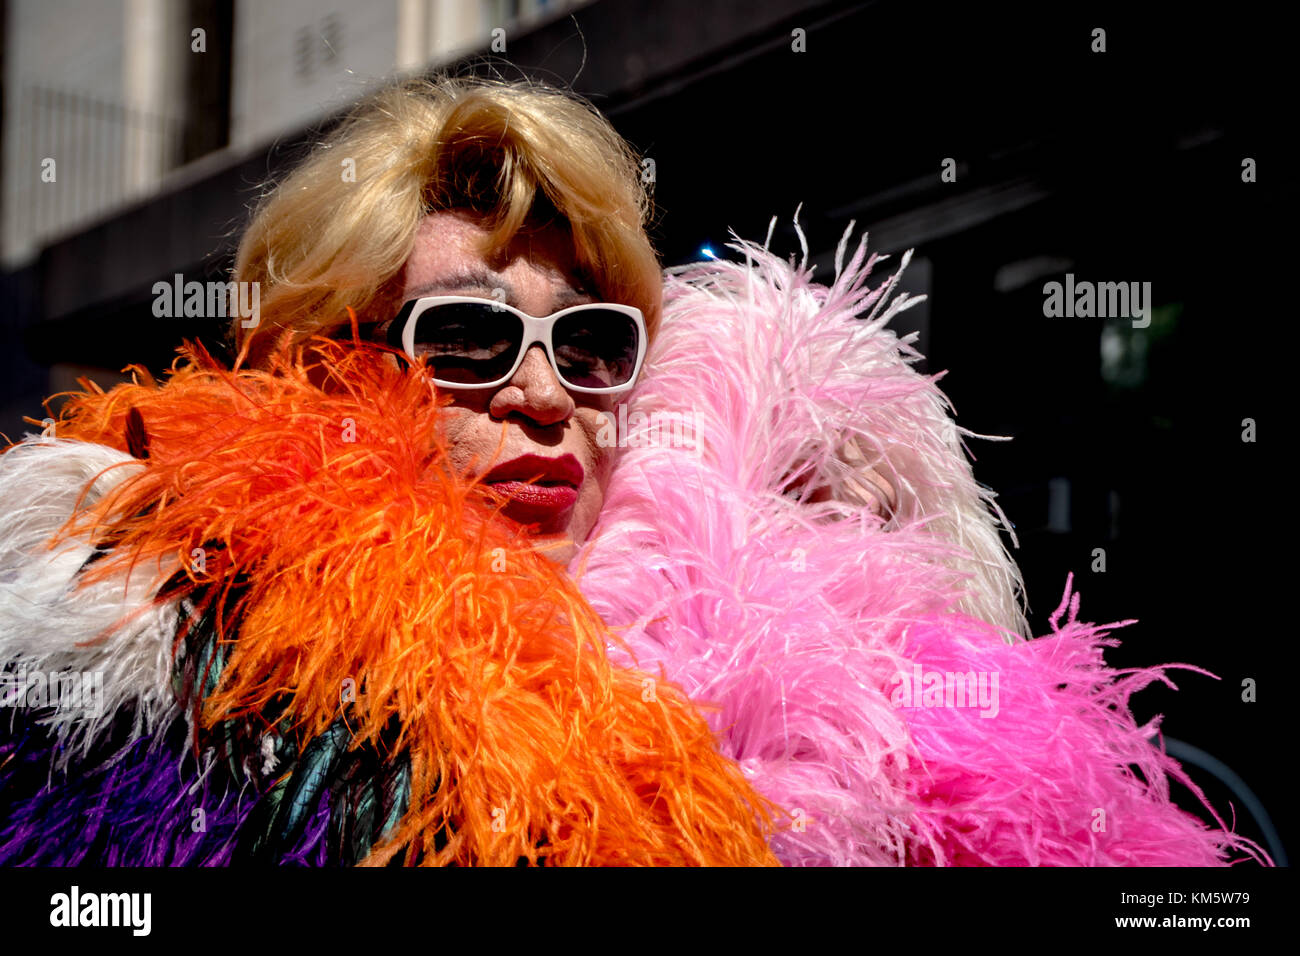 November 18, 2017 - Buenos Aires, Ciudad AutÃ³noma de Buenos Aires, Argentina - Sporting sunglasses, feathers, and faux fur; a supporter poses for the camera. Thousands of pride supporters marched from Plaza de Mayo to Congreso de la NaciÃ³n during the city's 26th annual Marcha del Orgullo Gay Credit: Jason Sheil/SOPA/ZUMA Wire/Alamy Live News Stock Photo